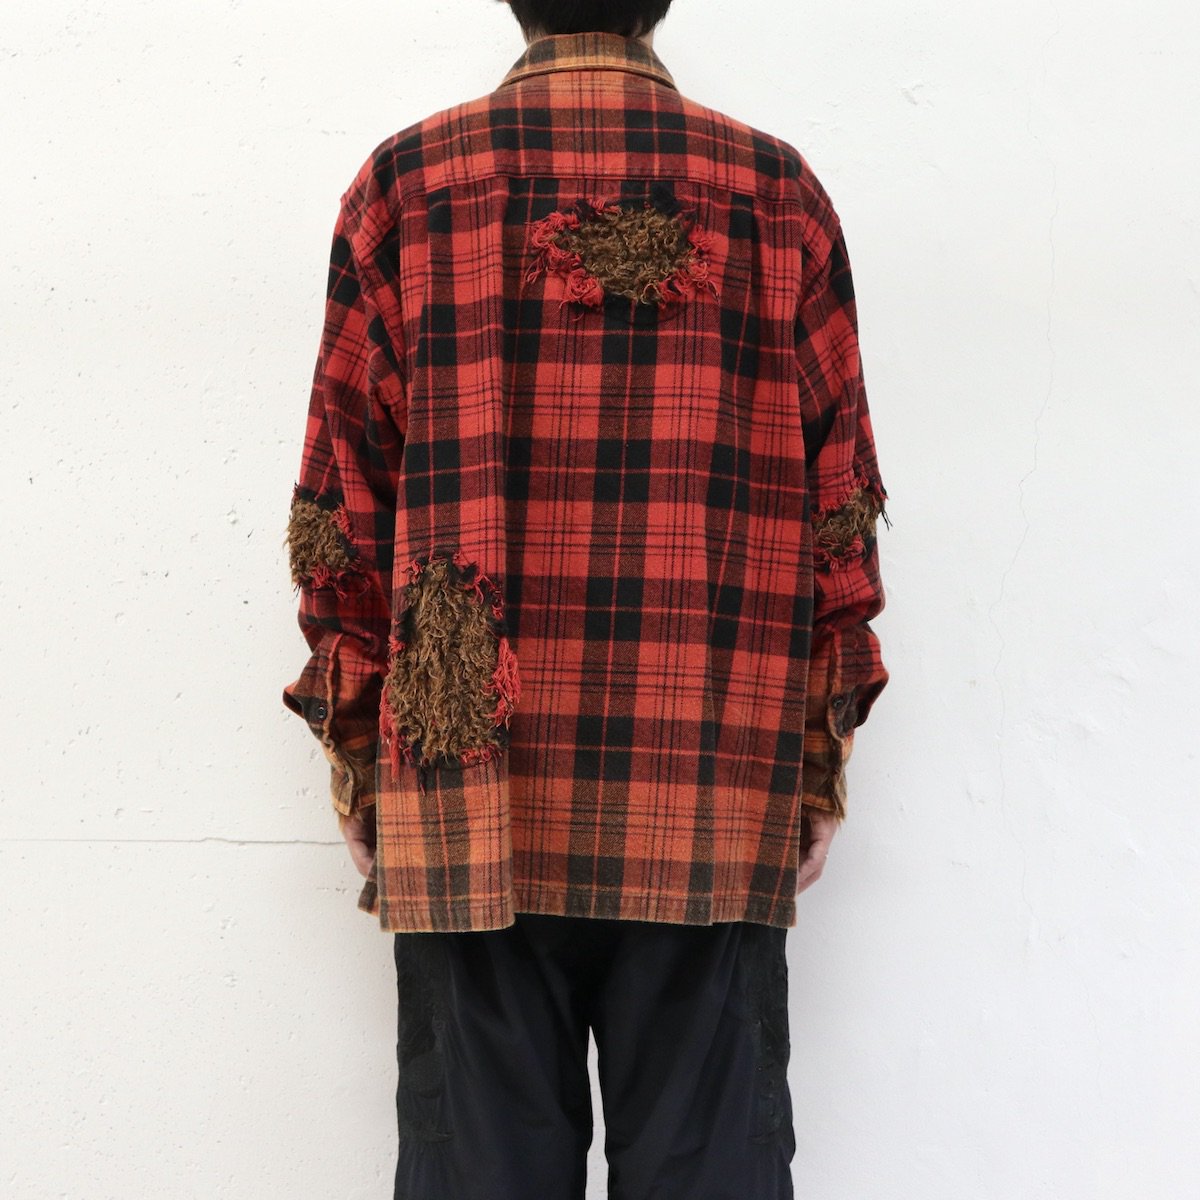 doublet / WEREWOLF CHECK SHIRT-doublet(ダブレット)の通販EQUAL